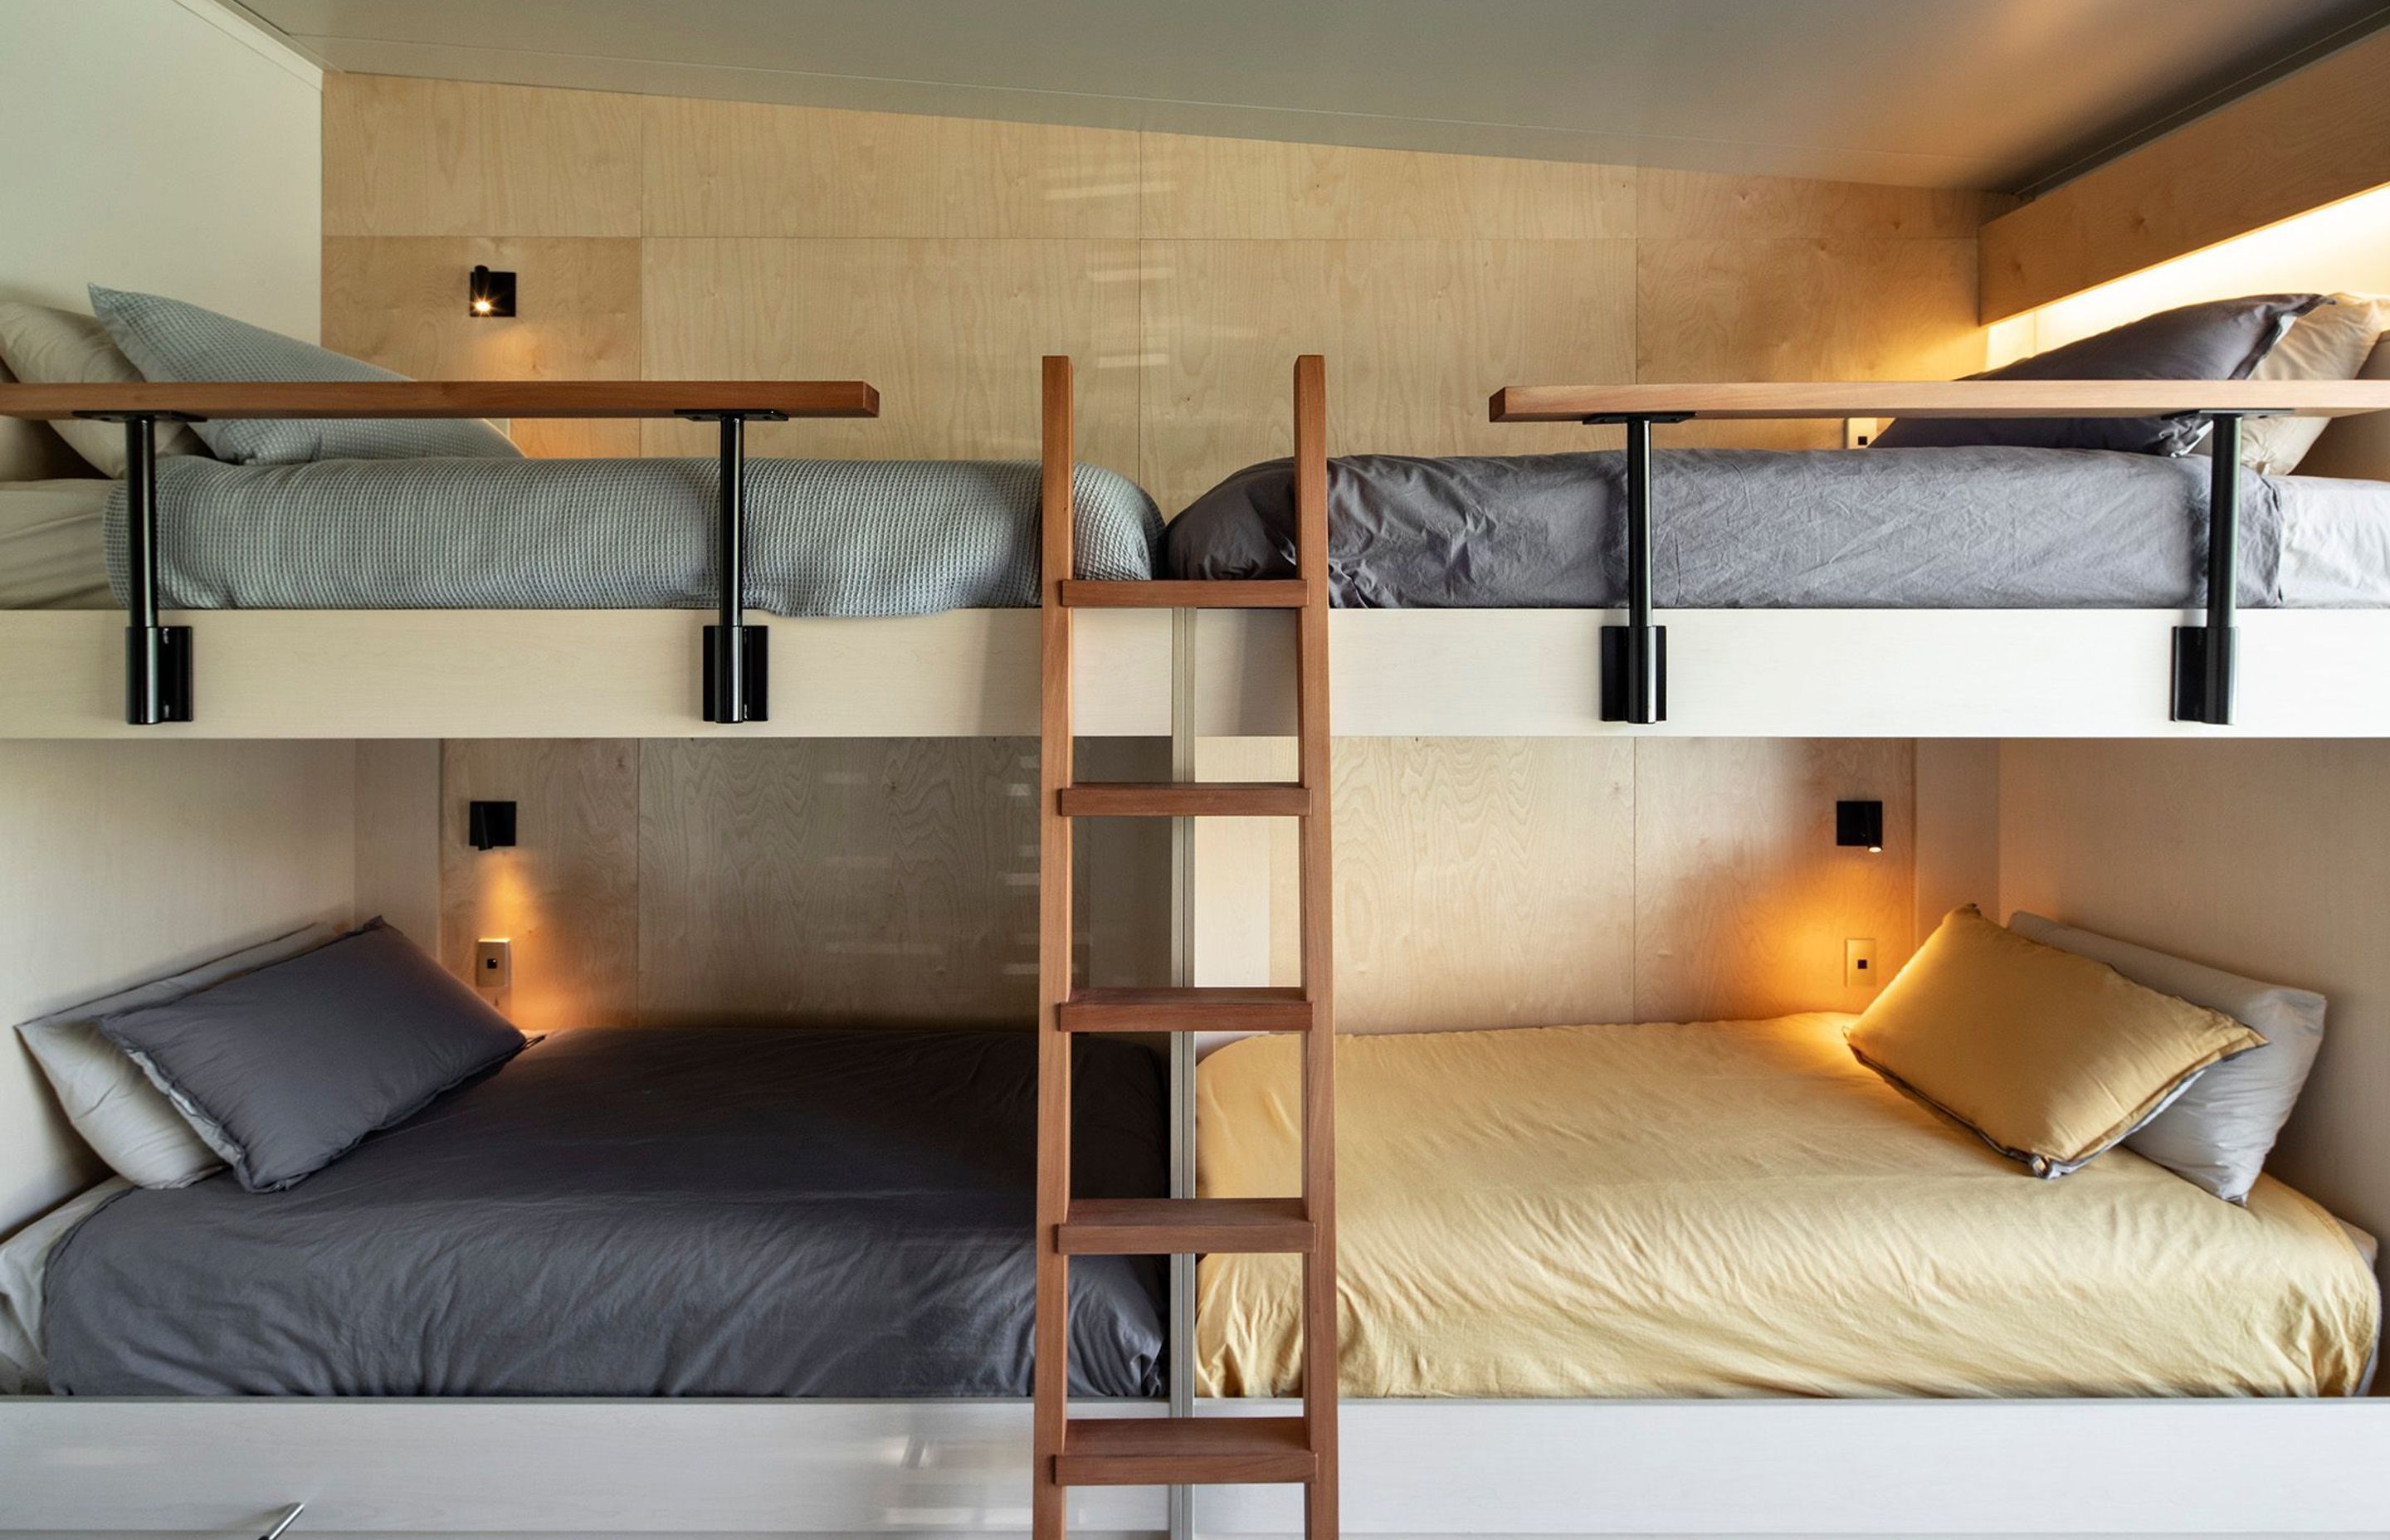 Custom designed by the architects, the grandchildrens' bunkroom has four beds on one side and two on the other, providing the ultimate sleepover space. Photograph: Simon Devitt.